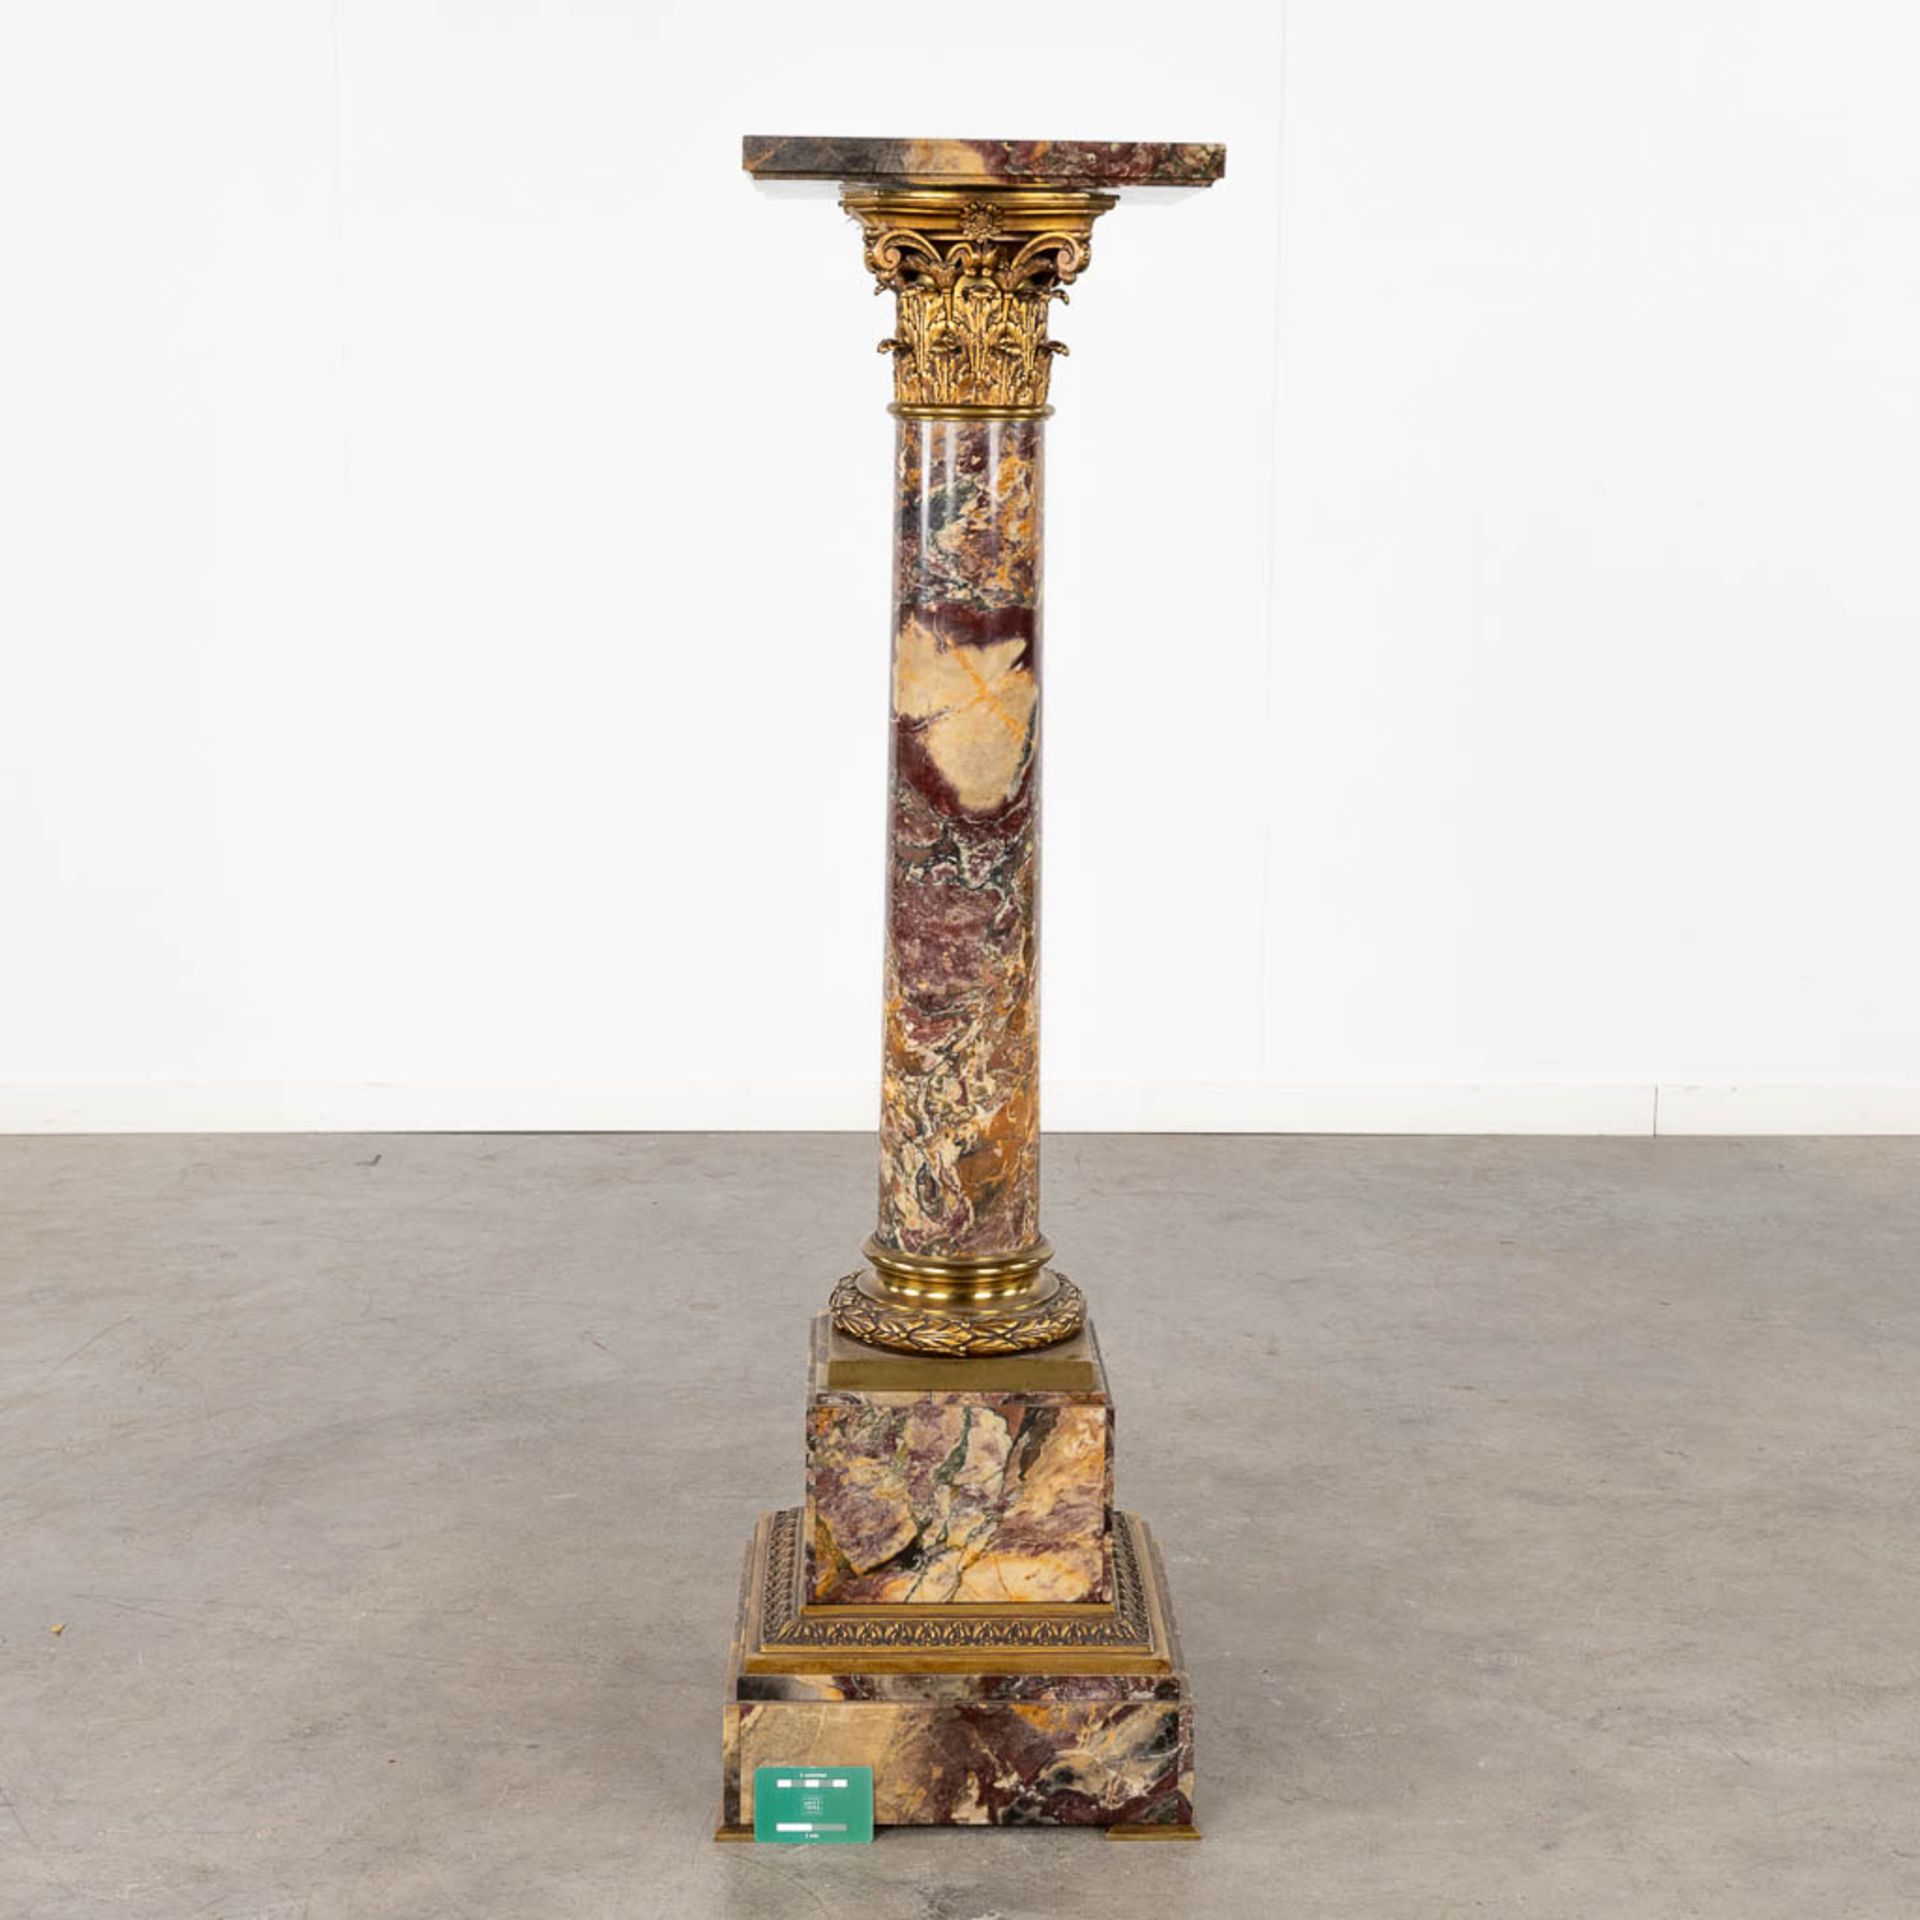 A pedestal, marble mounted with bronze in Corinthian style. Circa 1920. (D:35 x W:35 x H:120 cm) - Image 2 of 13